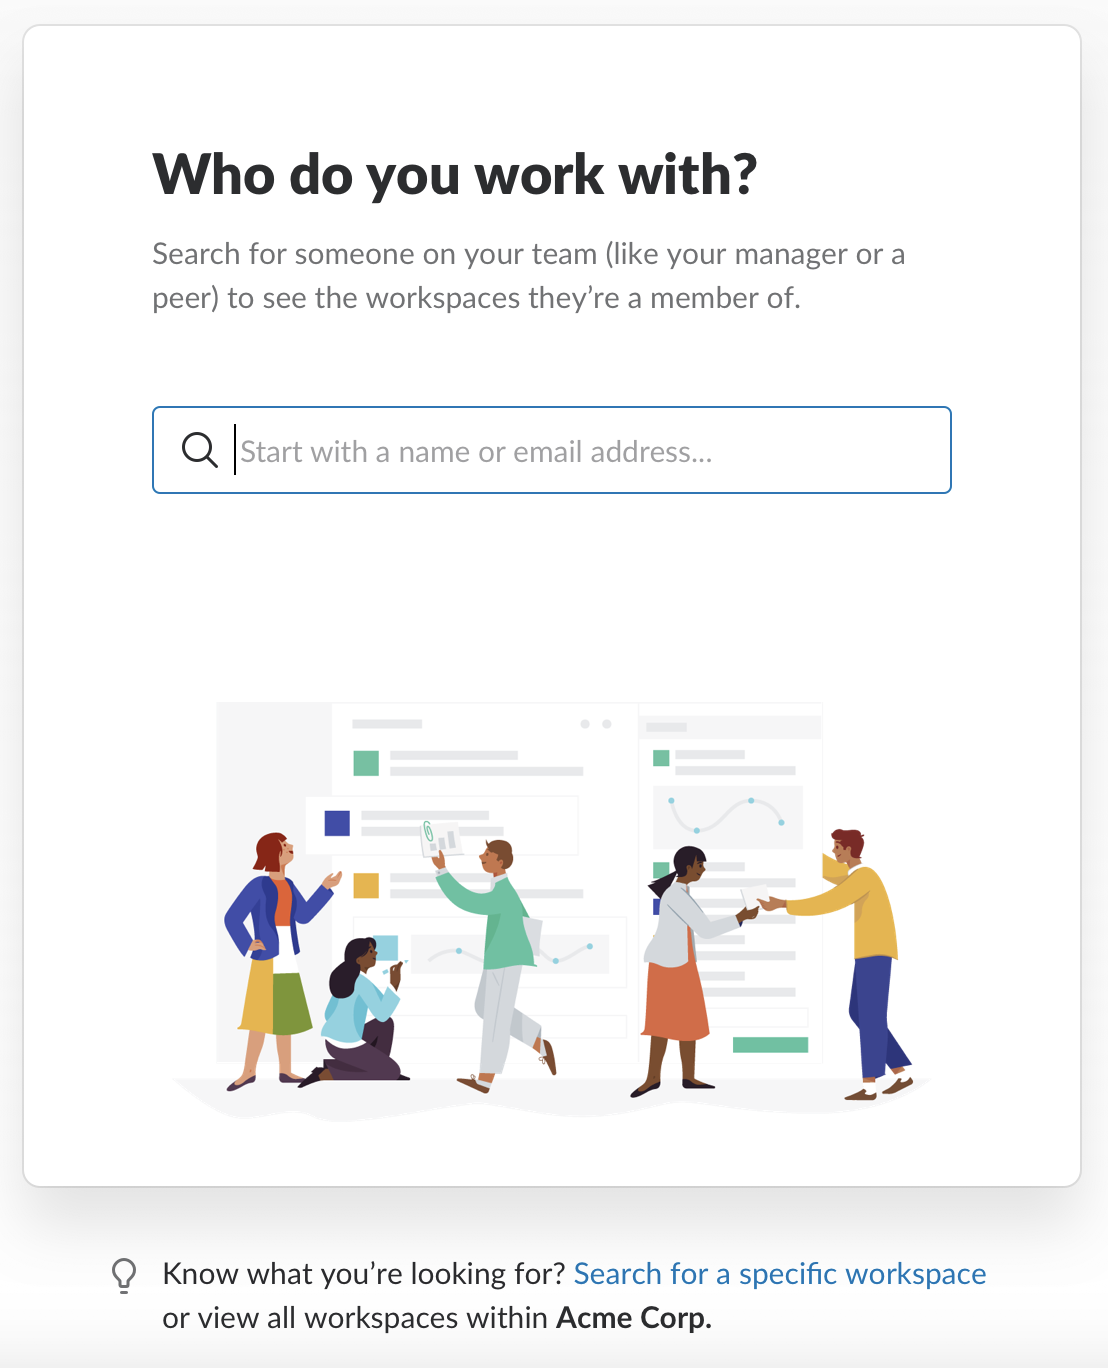 Prompt to search for others on your team to see the workspaces they're a member of